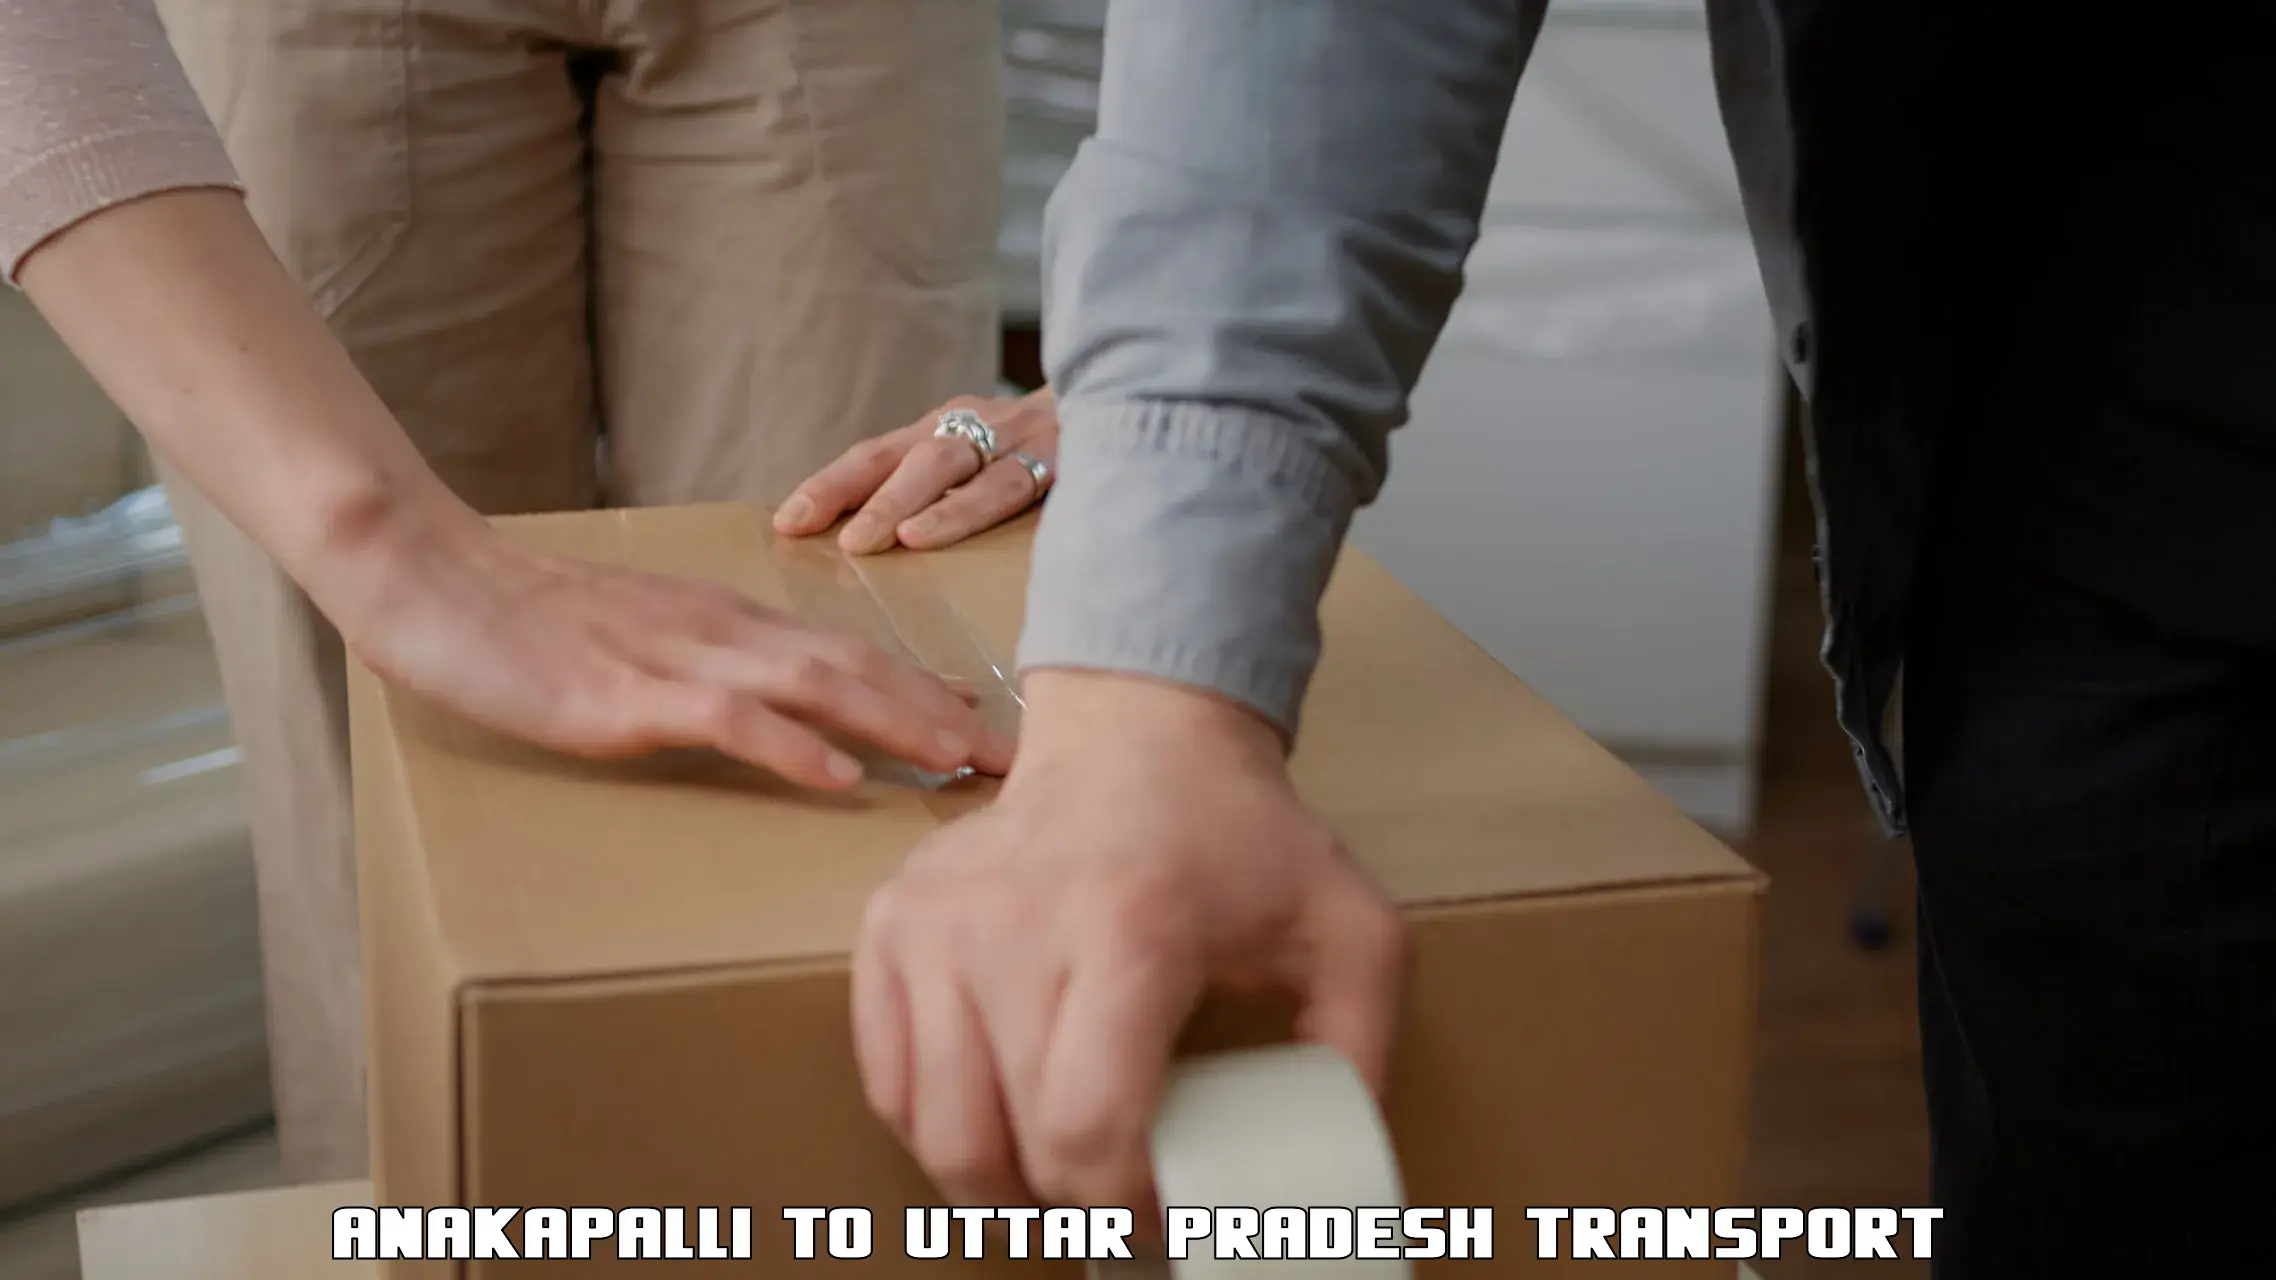 Container transport service Anakapalli to Lucknow